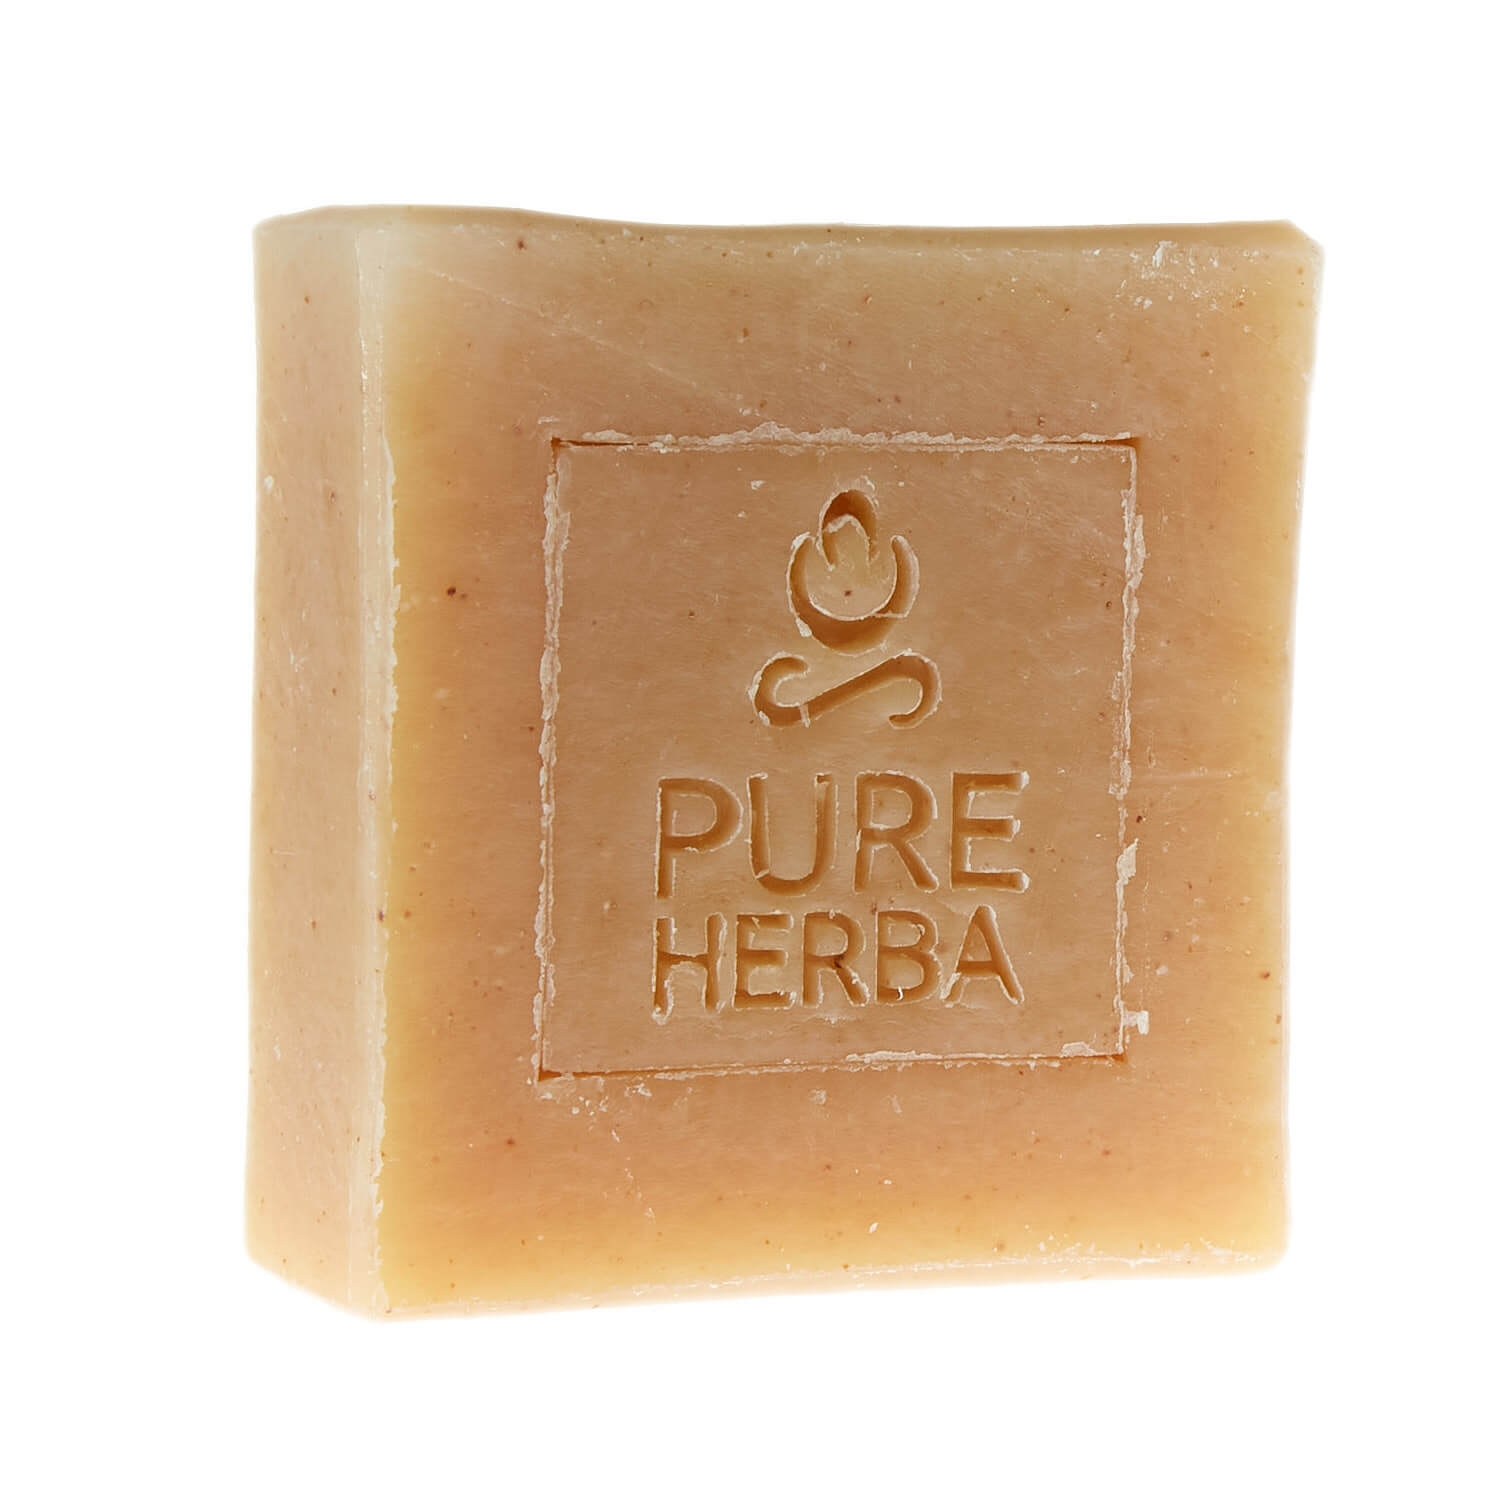 Turmeric Soap – 100% Natural & Ethical – No Harsh Chemicals – Pure Herba